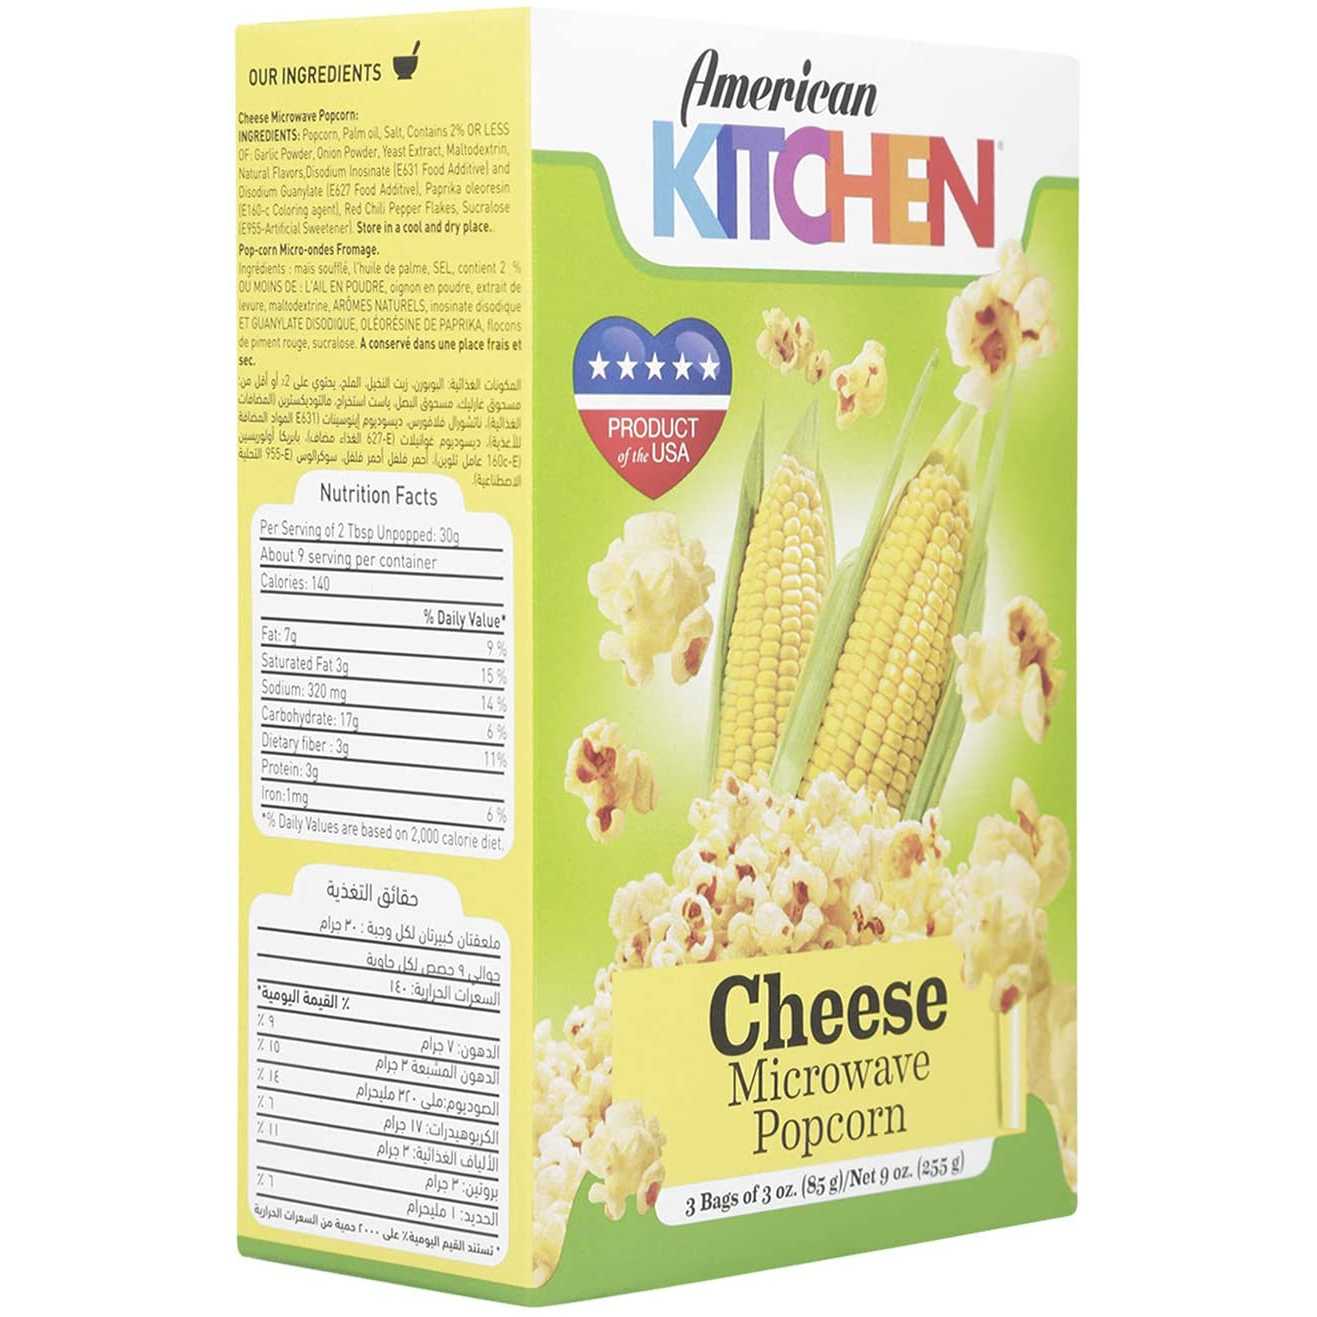 American Kitchen Cheese Microwave Popcorn, 85g - Pack of 3